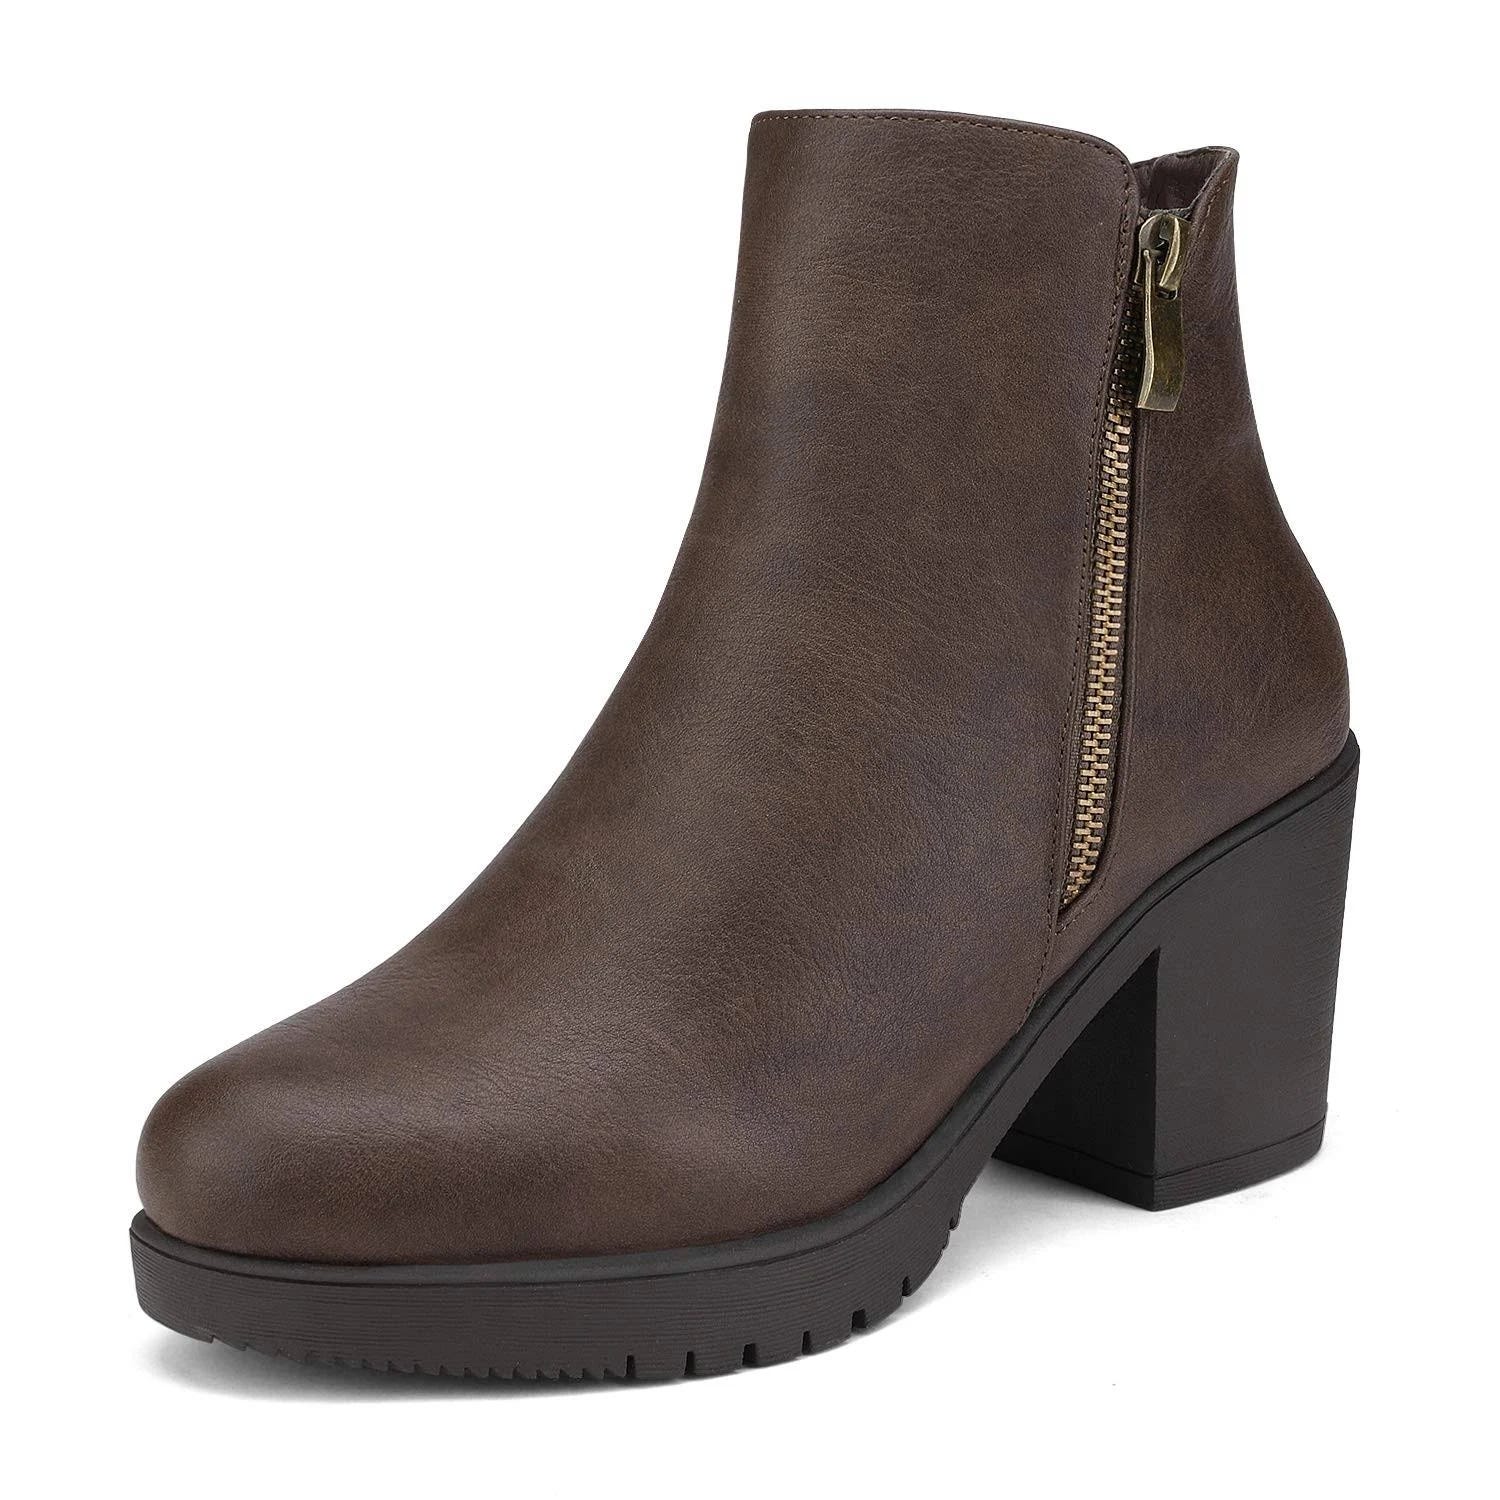 Women's Low Heel Chunky Ankle Boots - Durable & Stylish Winter Shoes for Comfort | Image